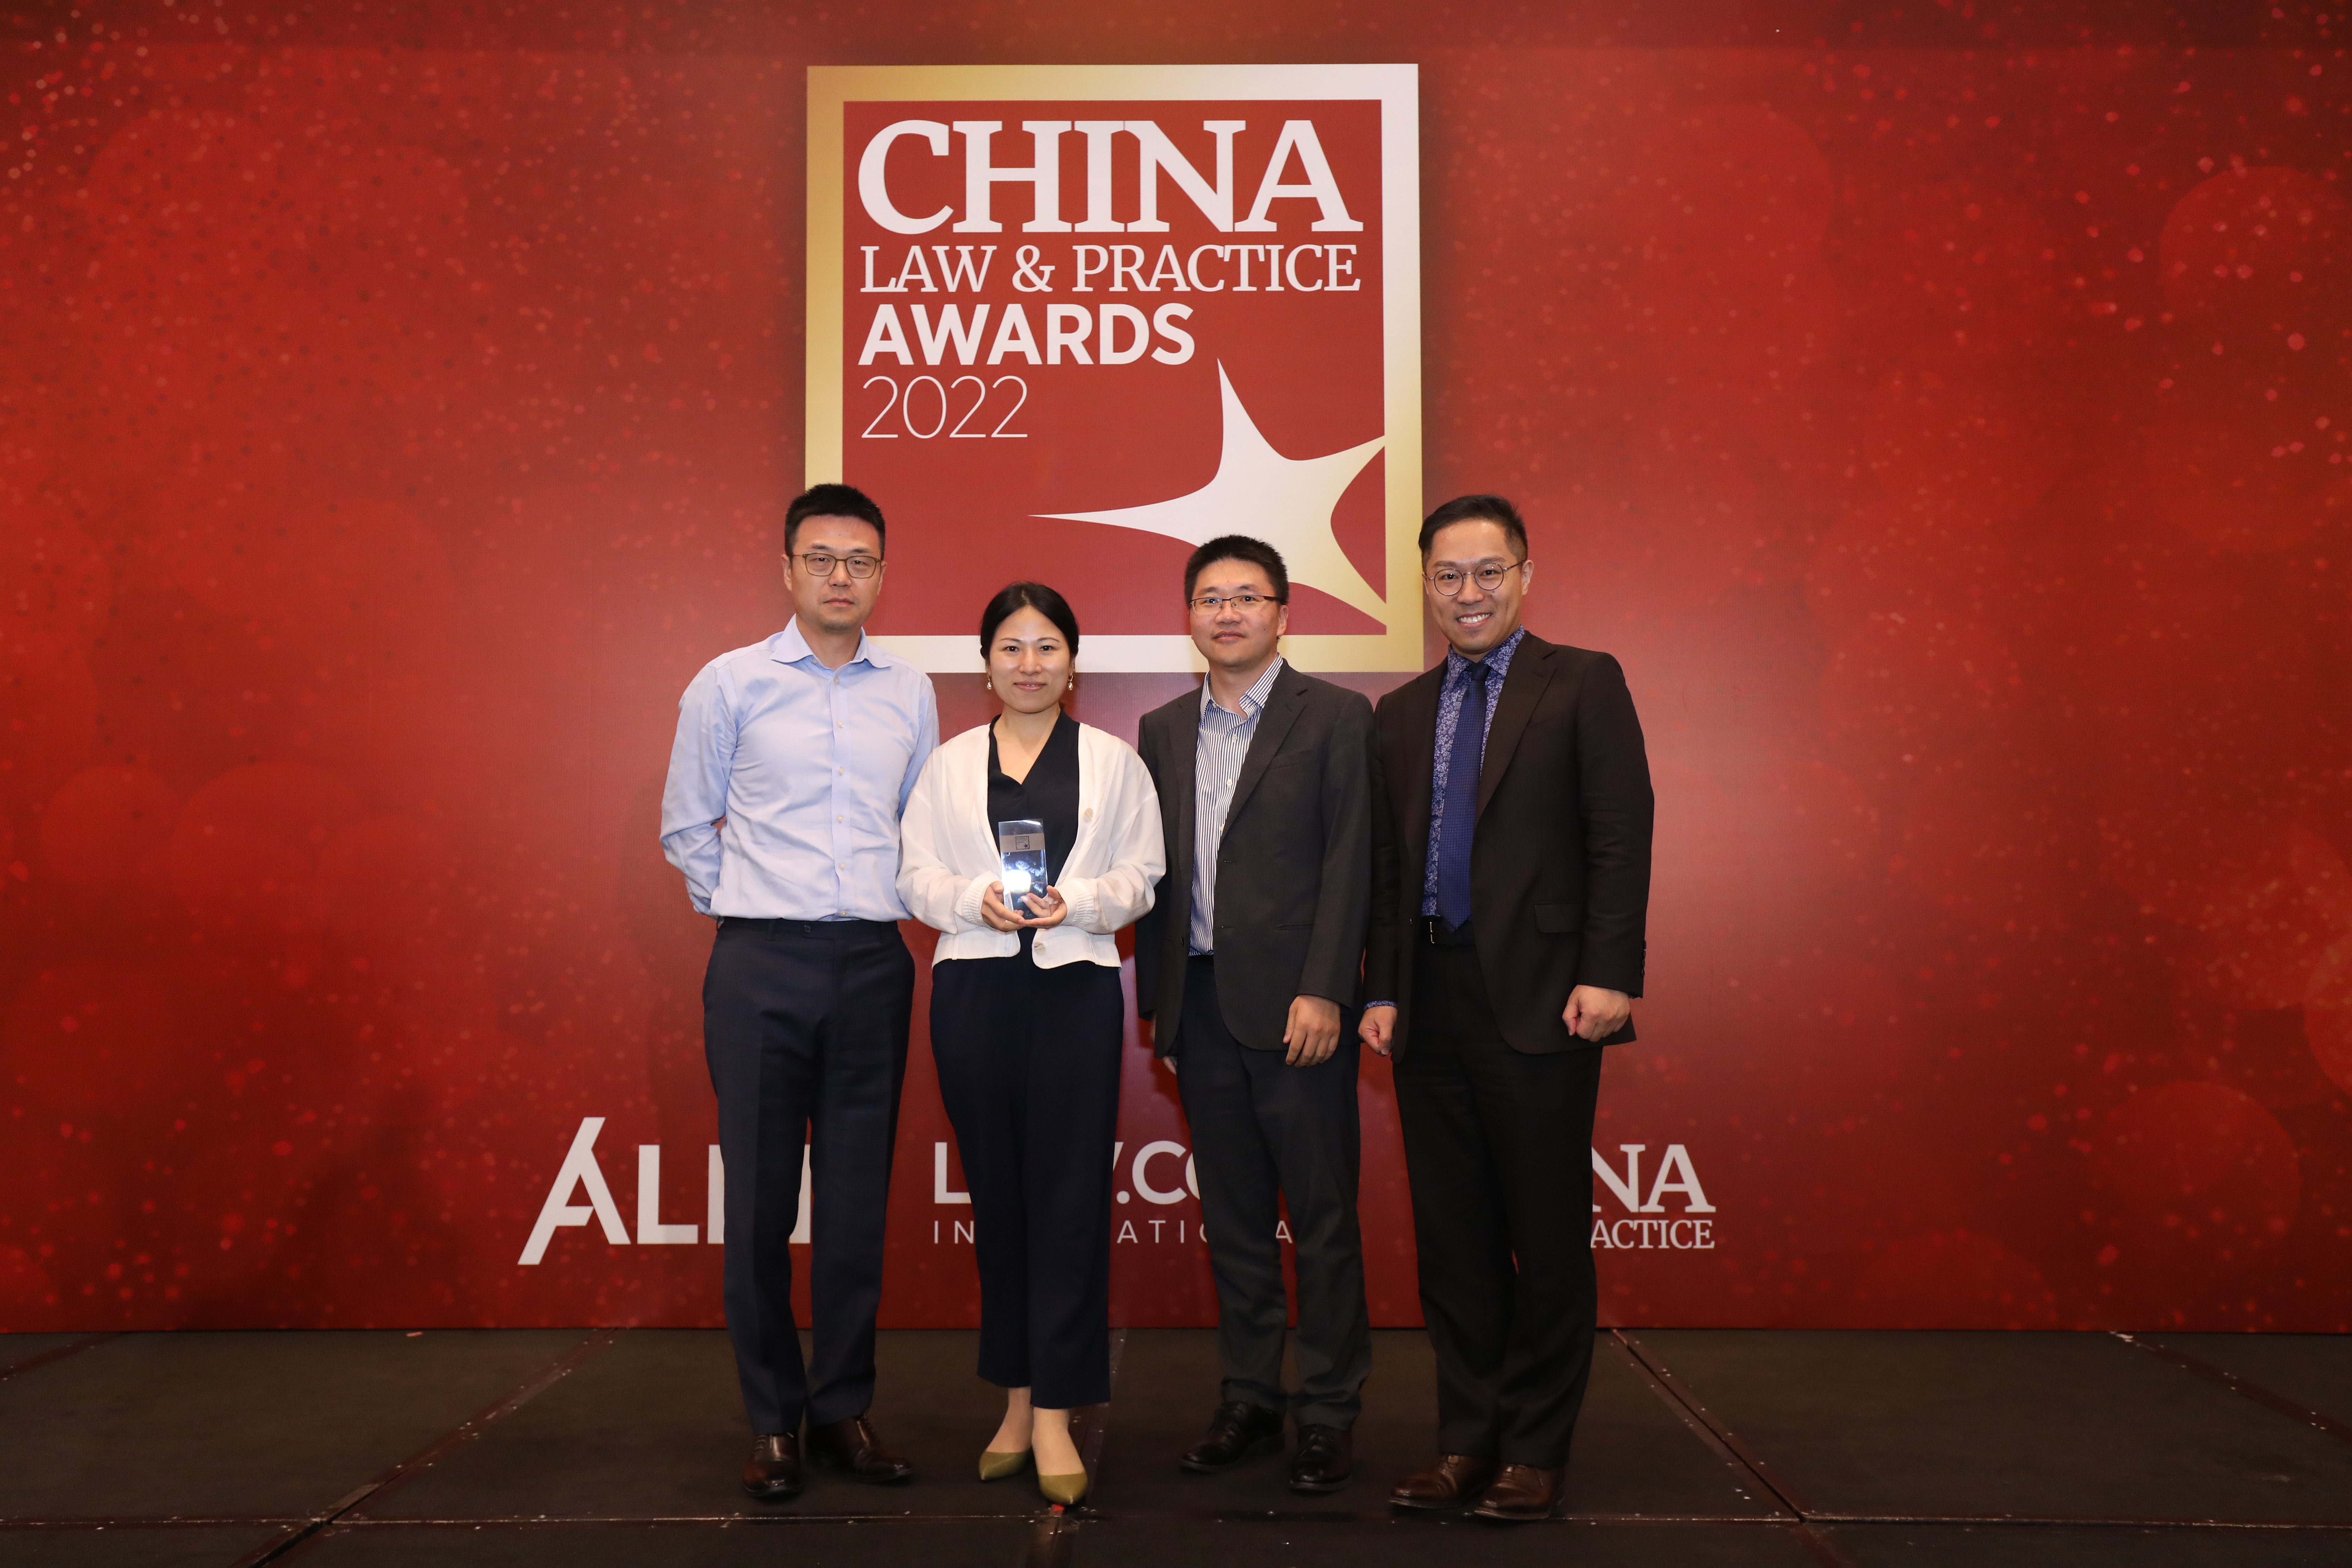 Winners of the China Law & Practice Awards 2022